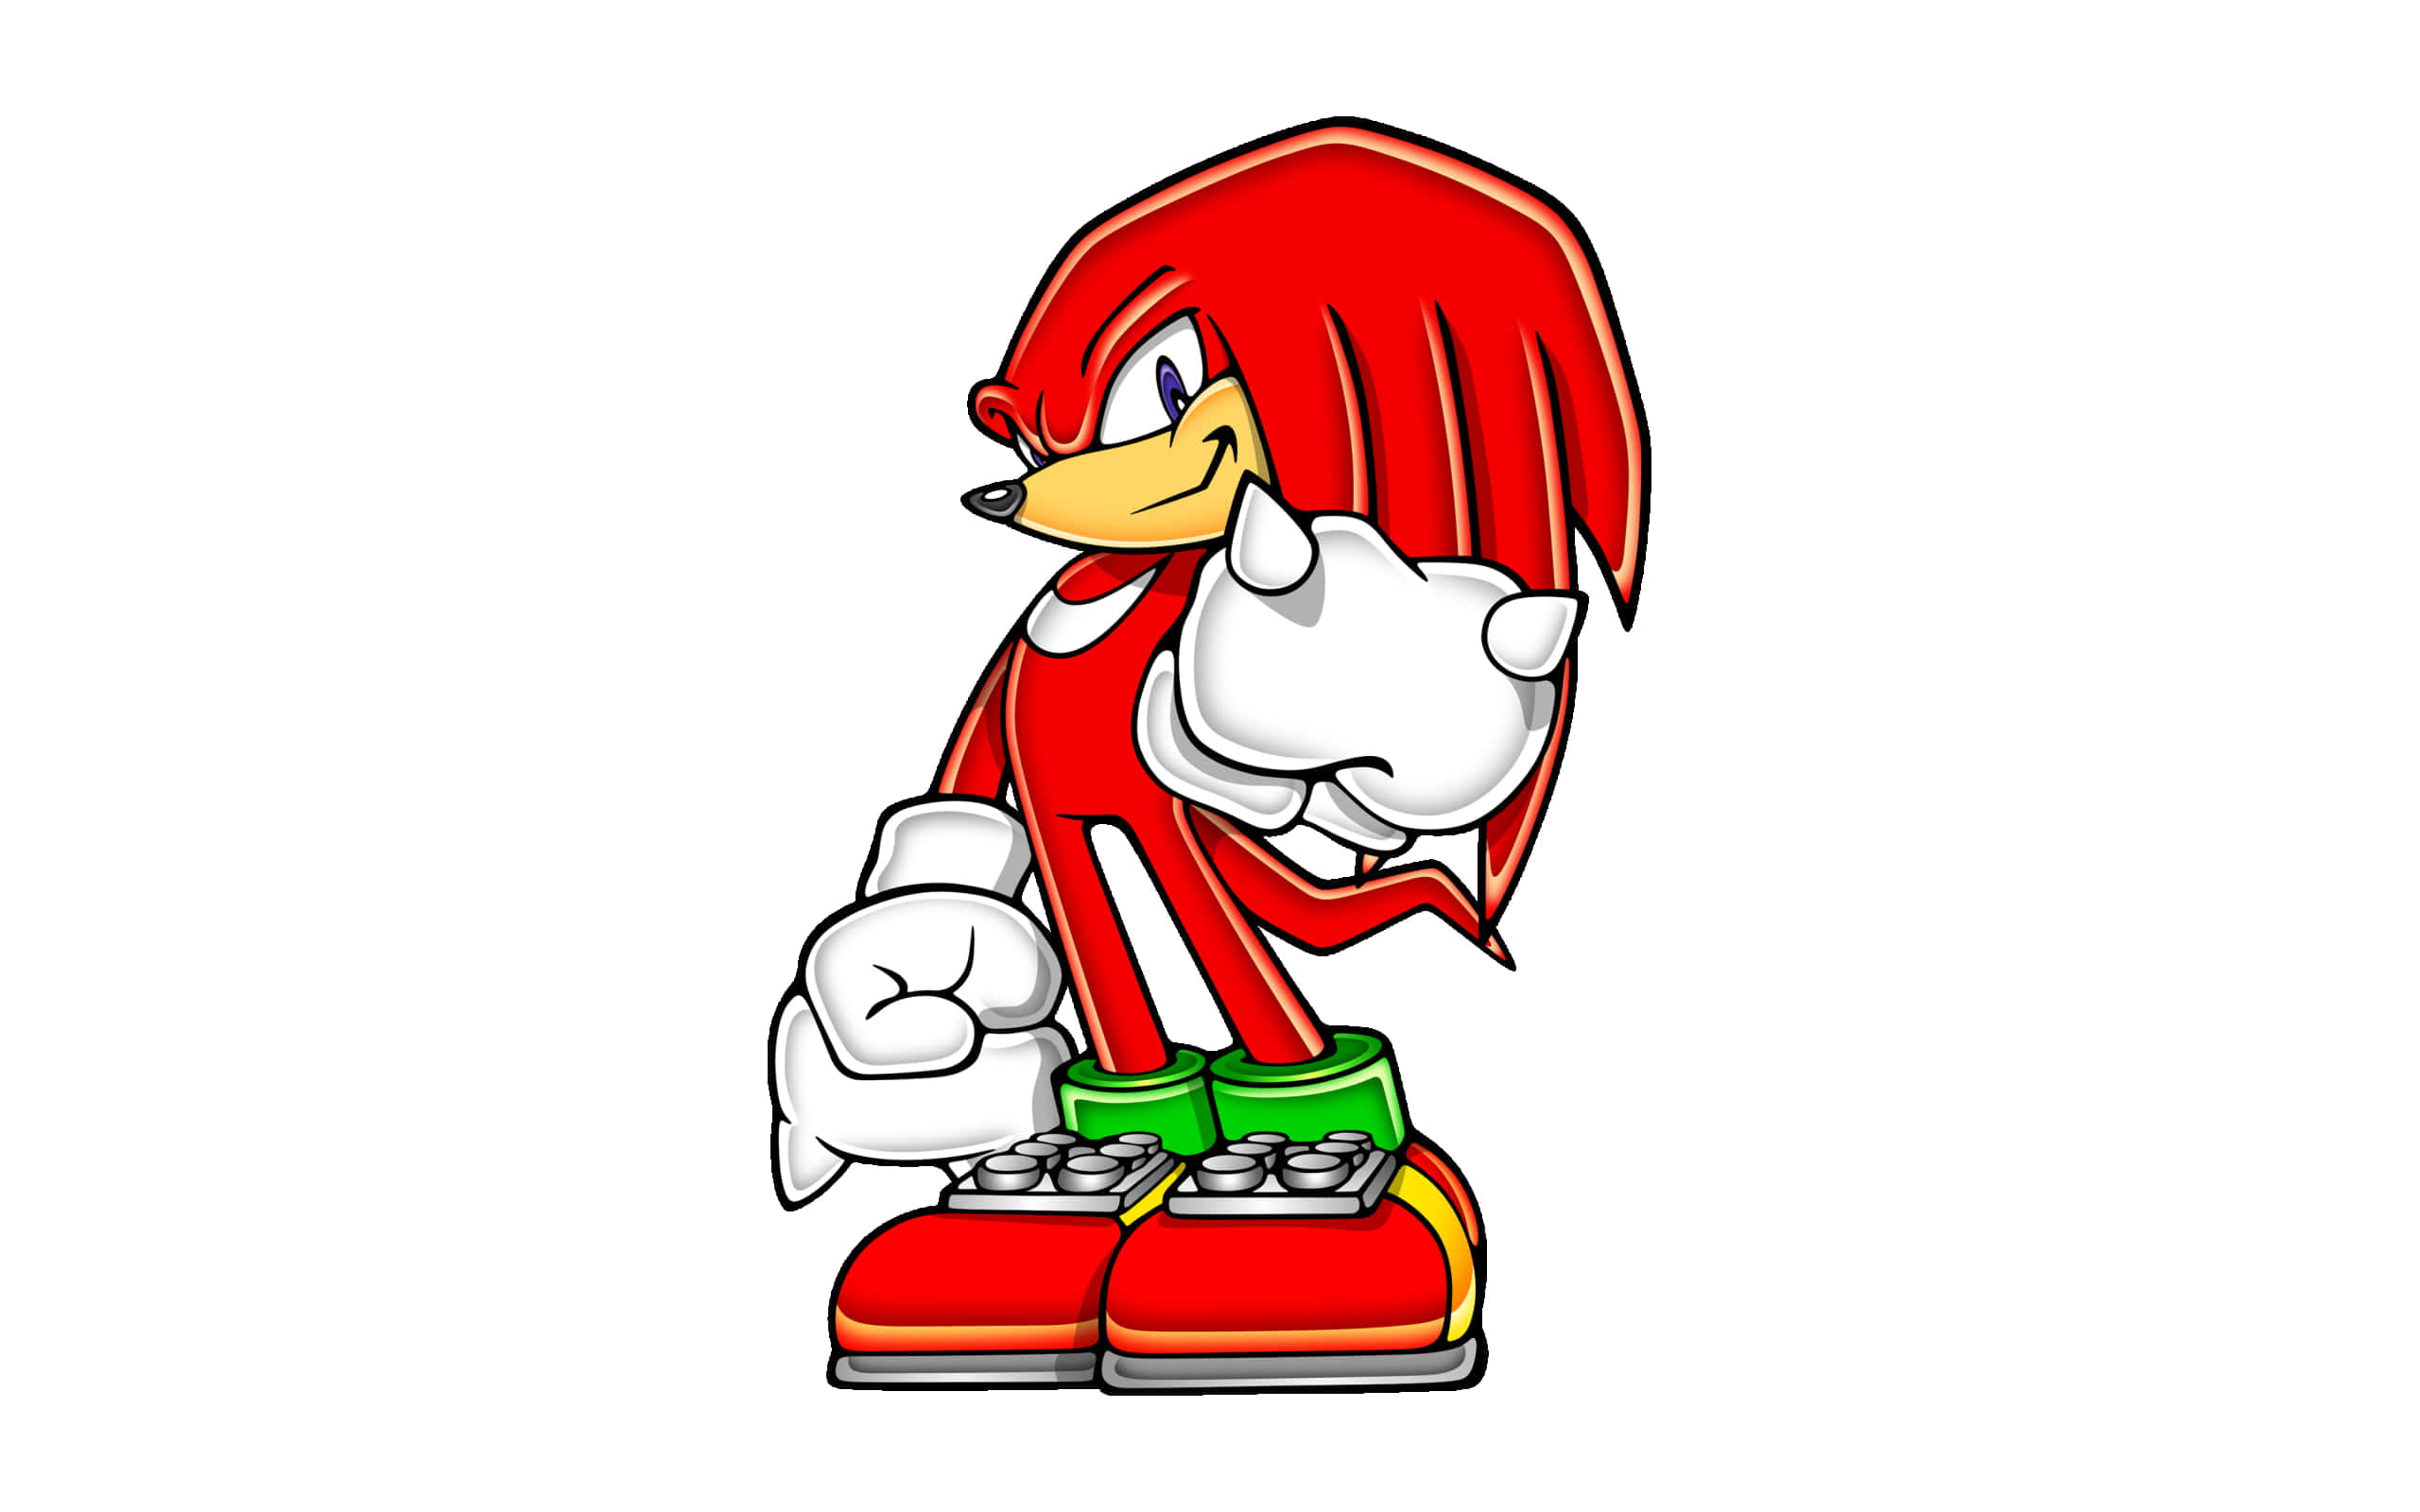 Sonic The Hedgehog Cartoon Character With Red Hair Background